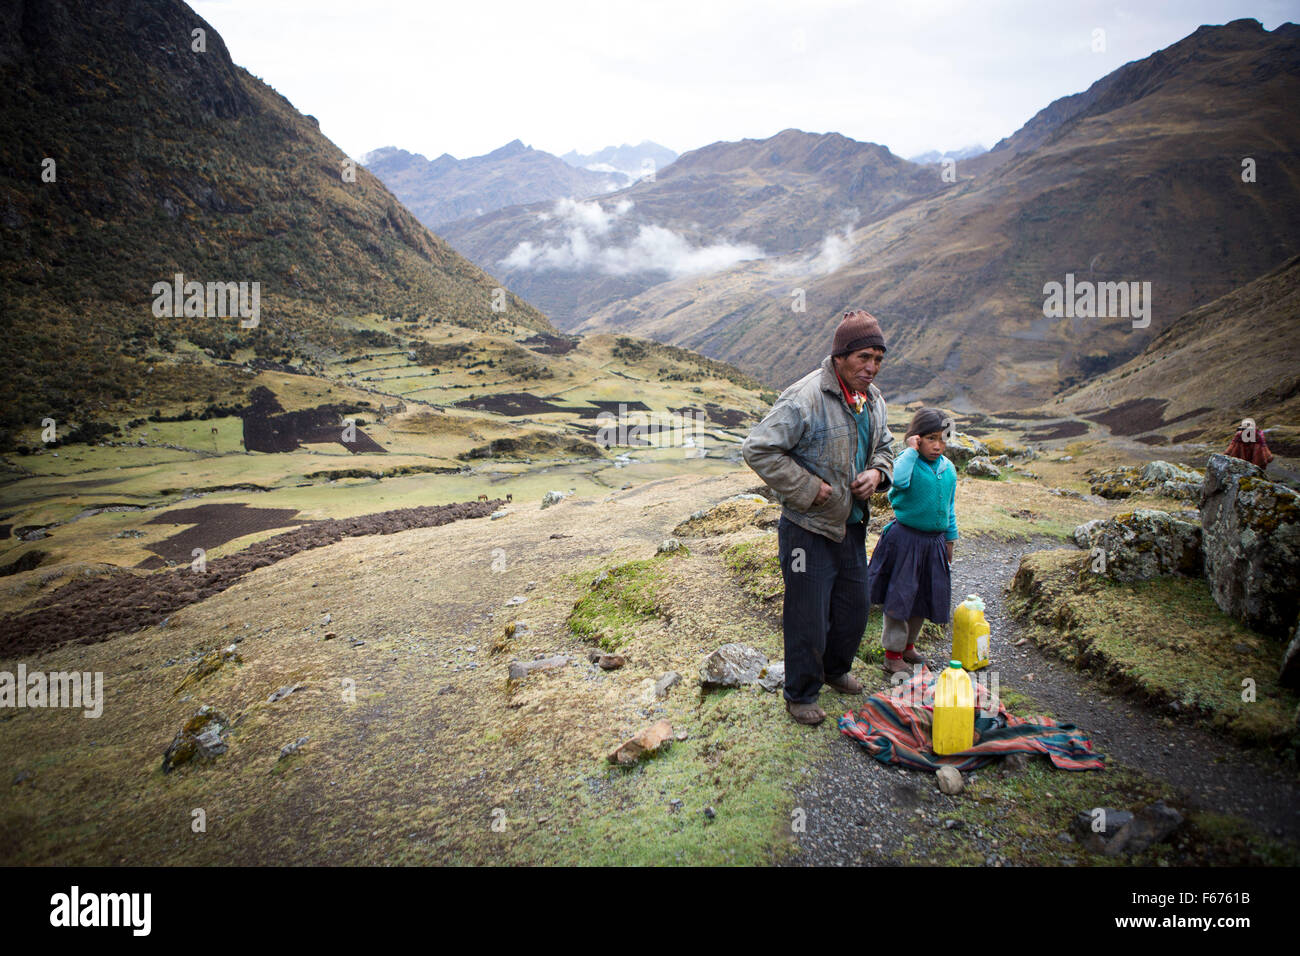 The Lares District of Peru. Lares District is one of eight districts of the province Calca in Peru. Stock Photo